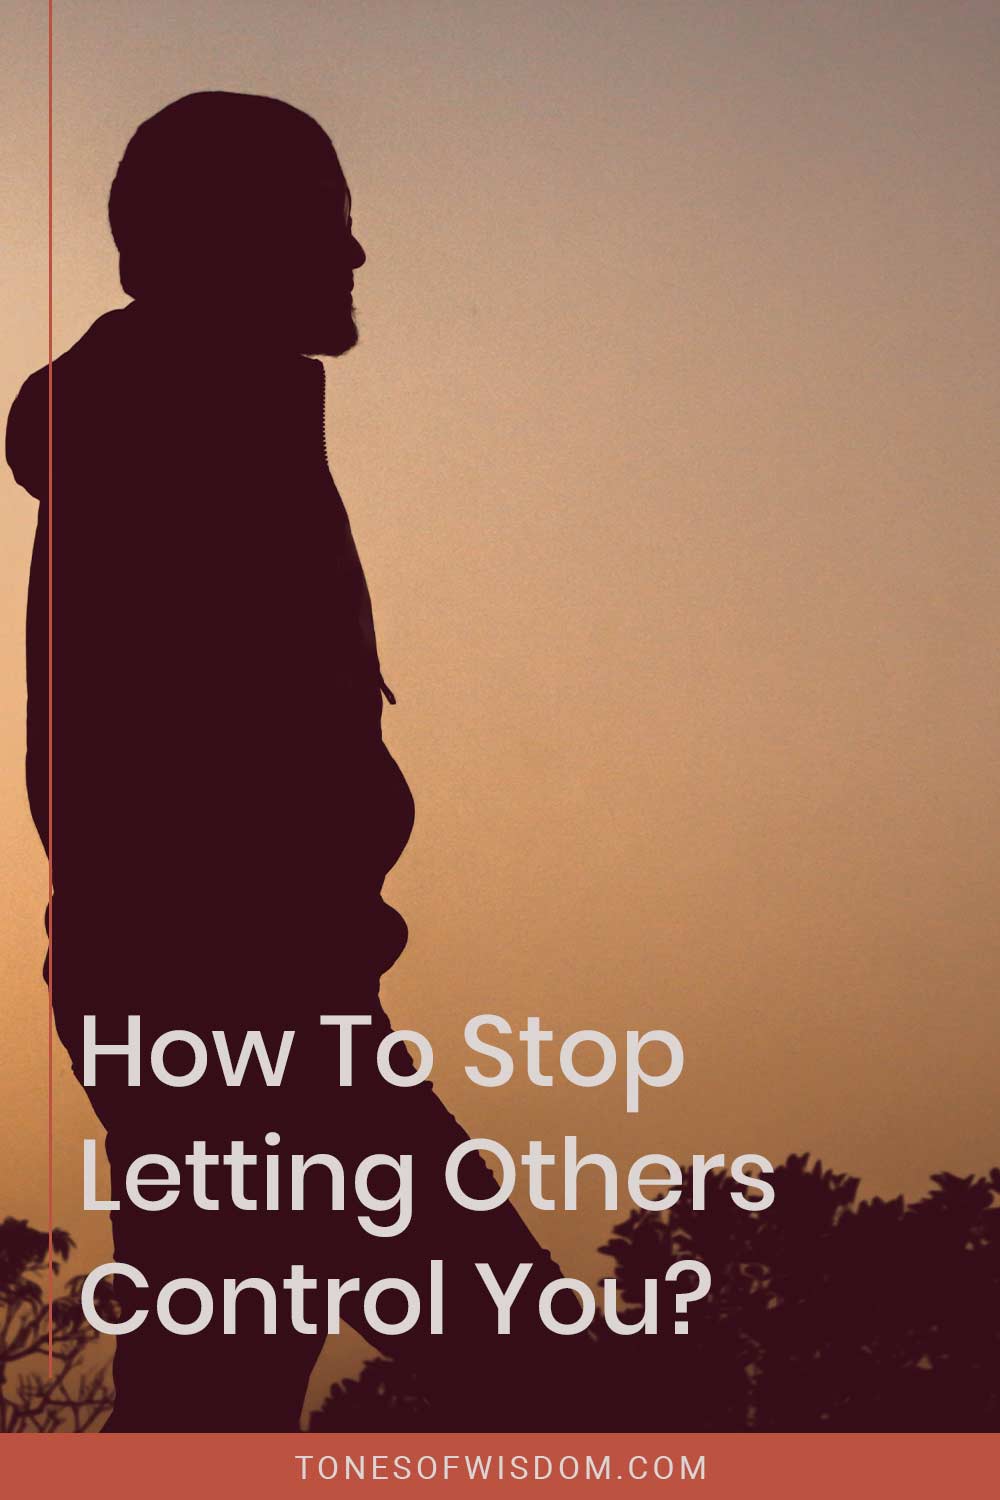 Man's silhouette - How To Stop Letting Others Control You?